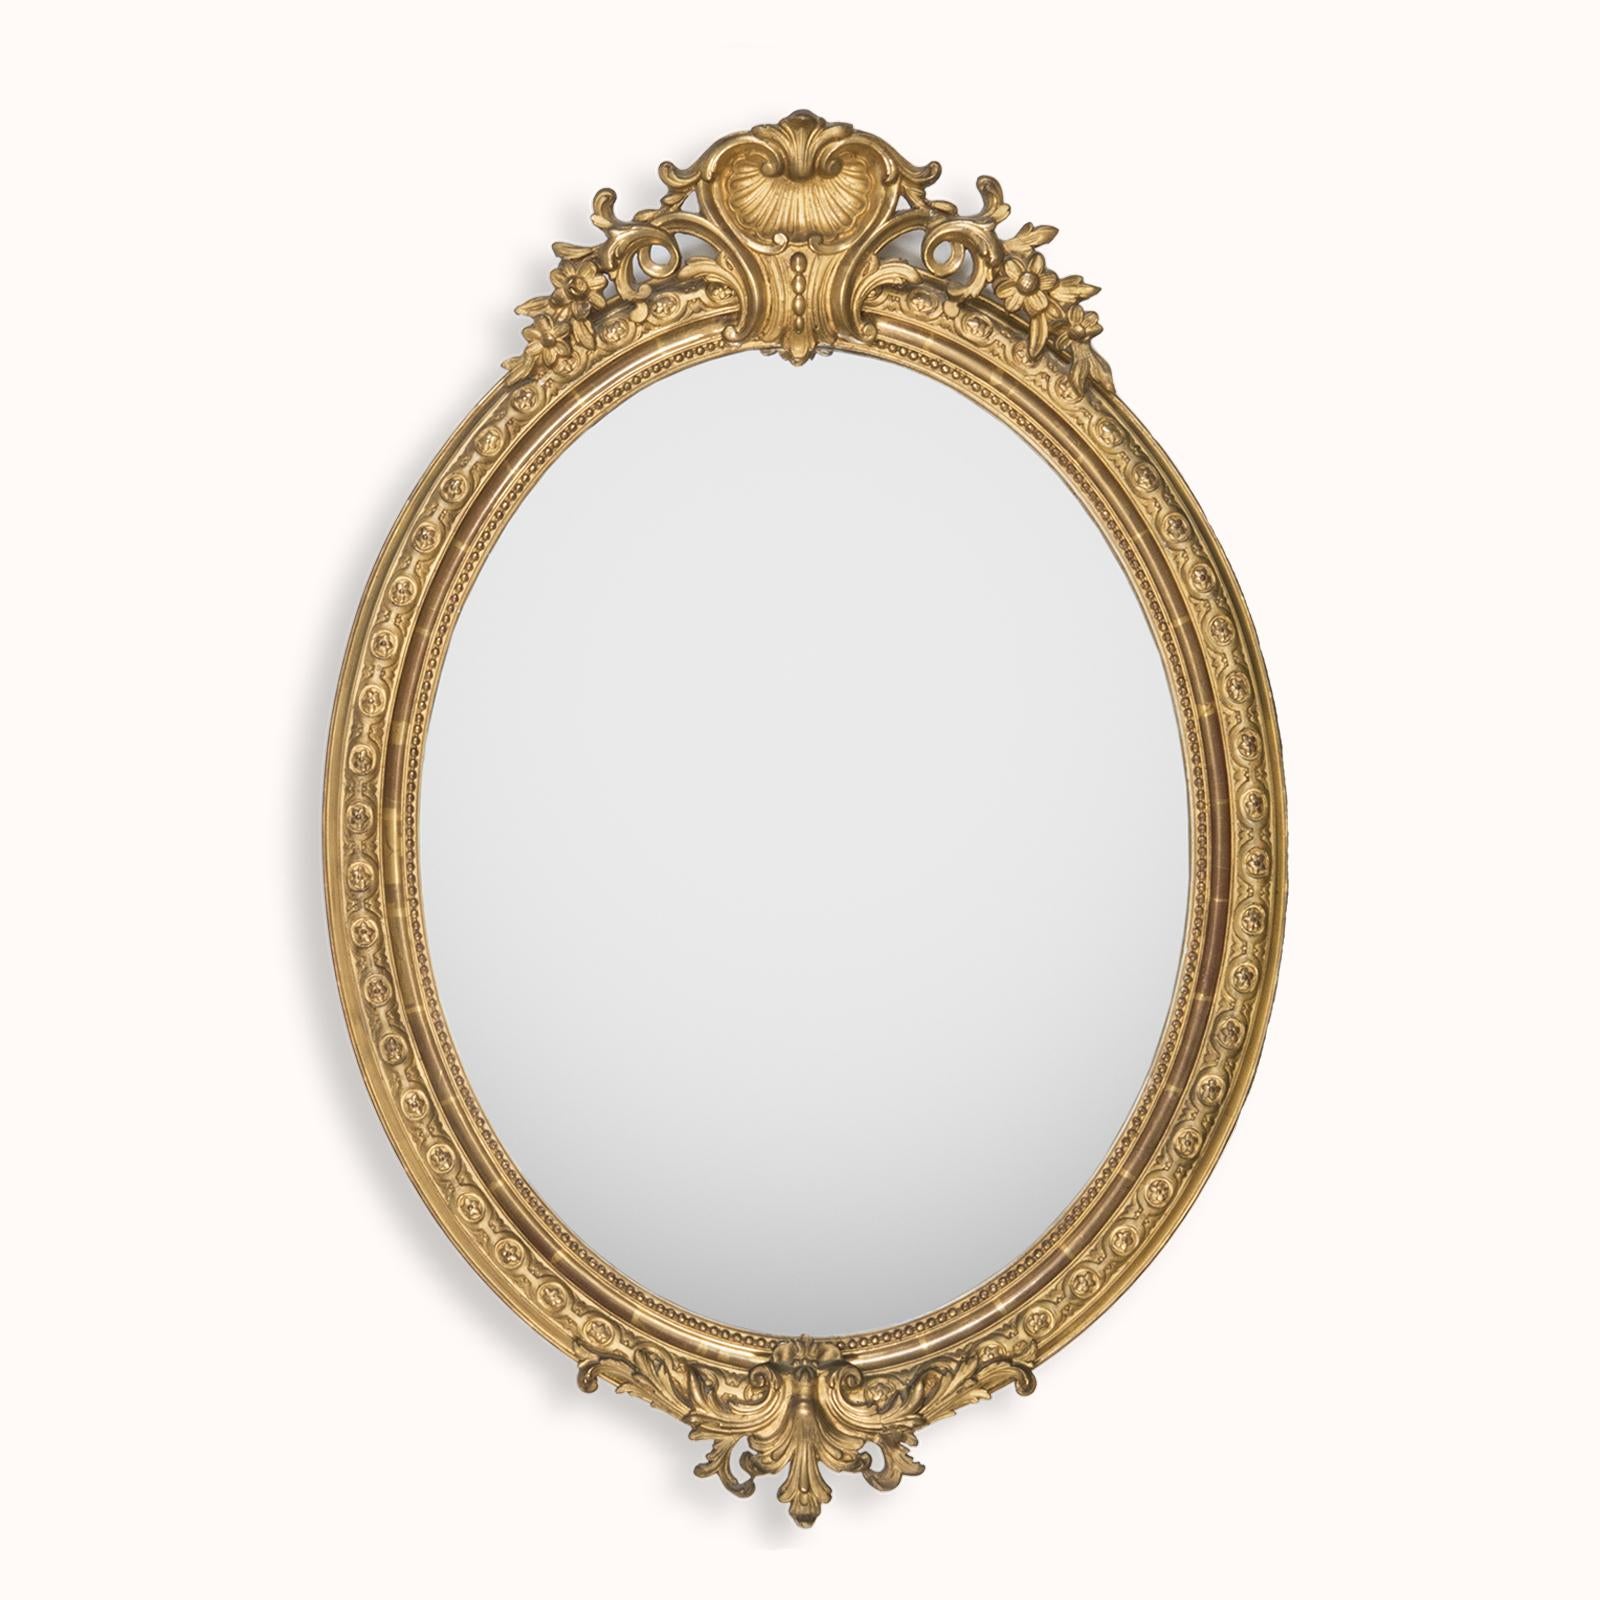 Lovely Antique French Oval Gilt Mirror from the 19th Century, Adorned with a Shell Shaped Crest.

Behold the beauty of this antique French oval mirror, a timeless piece crafted in France around the year 1880.

The mirror’s frame boasts intricate